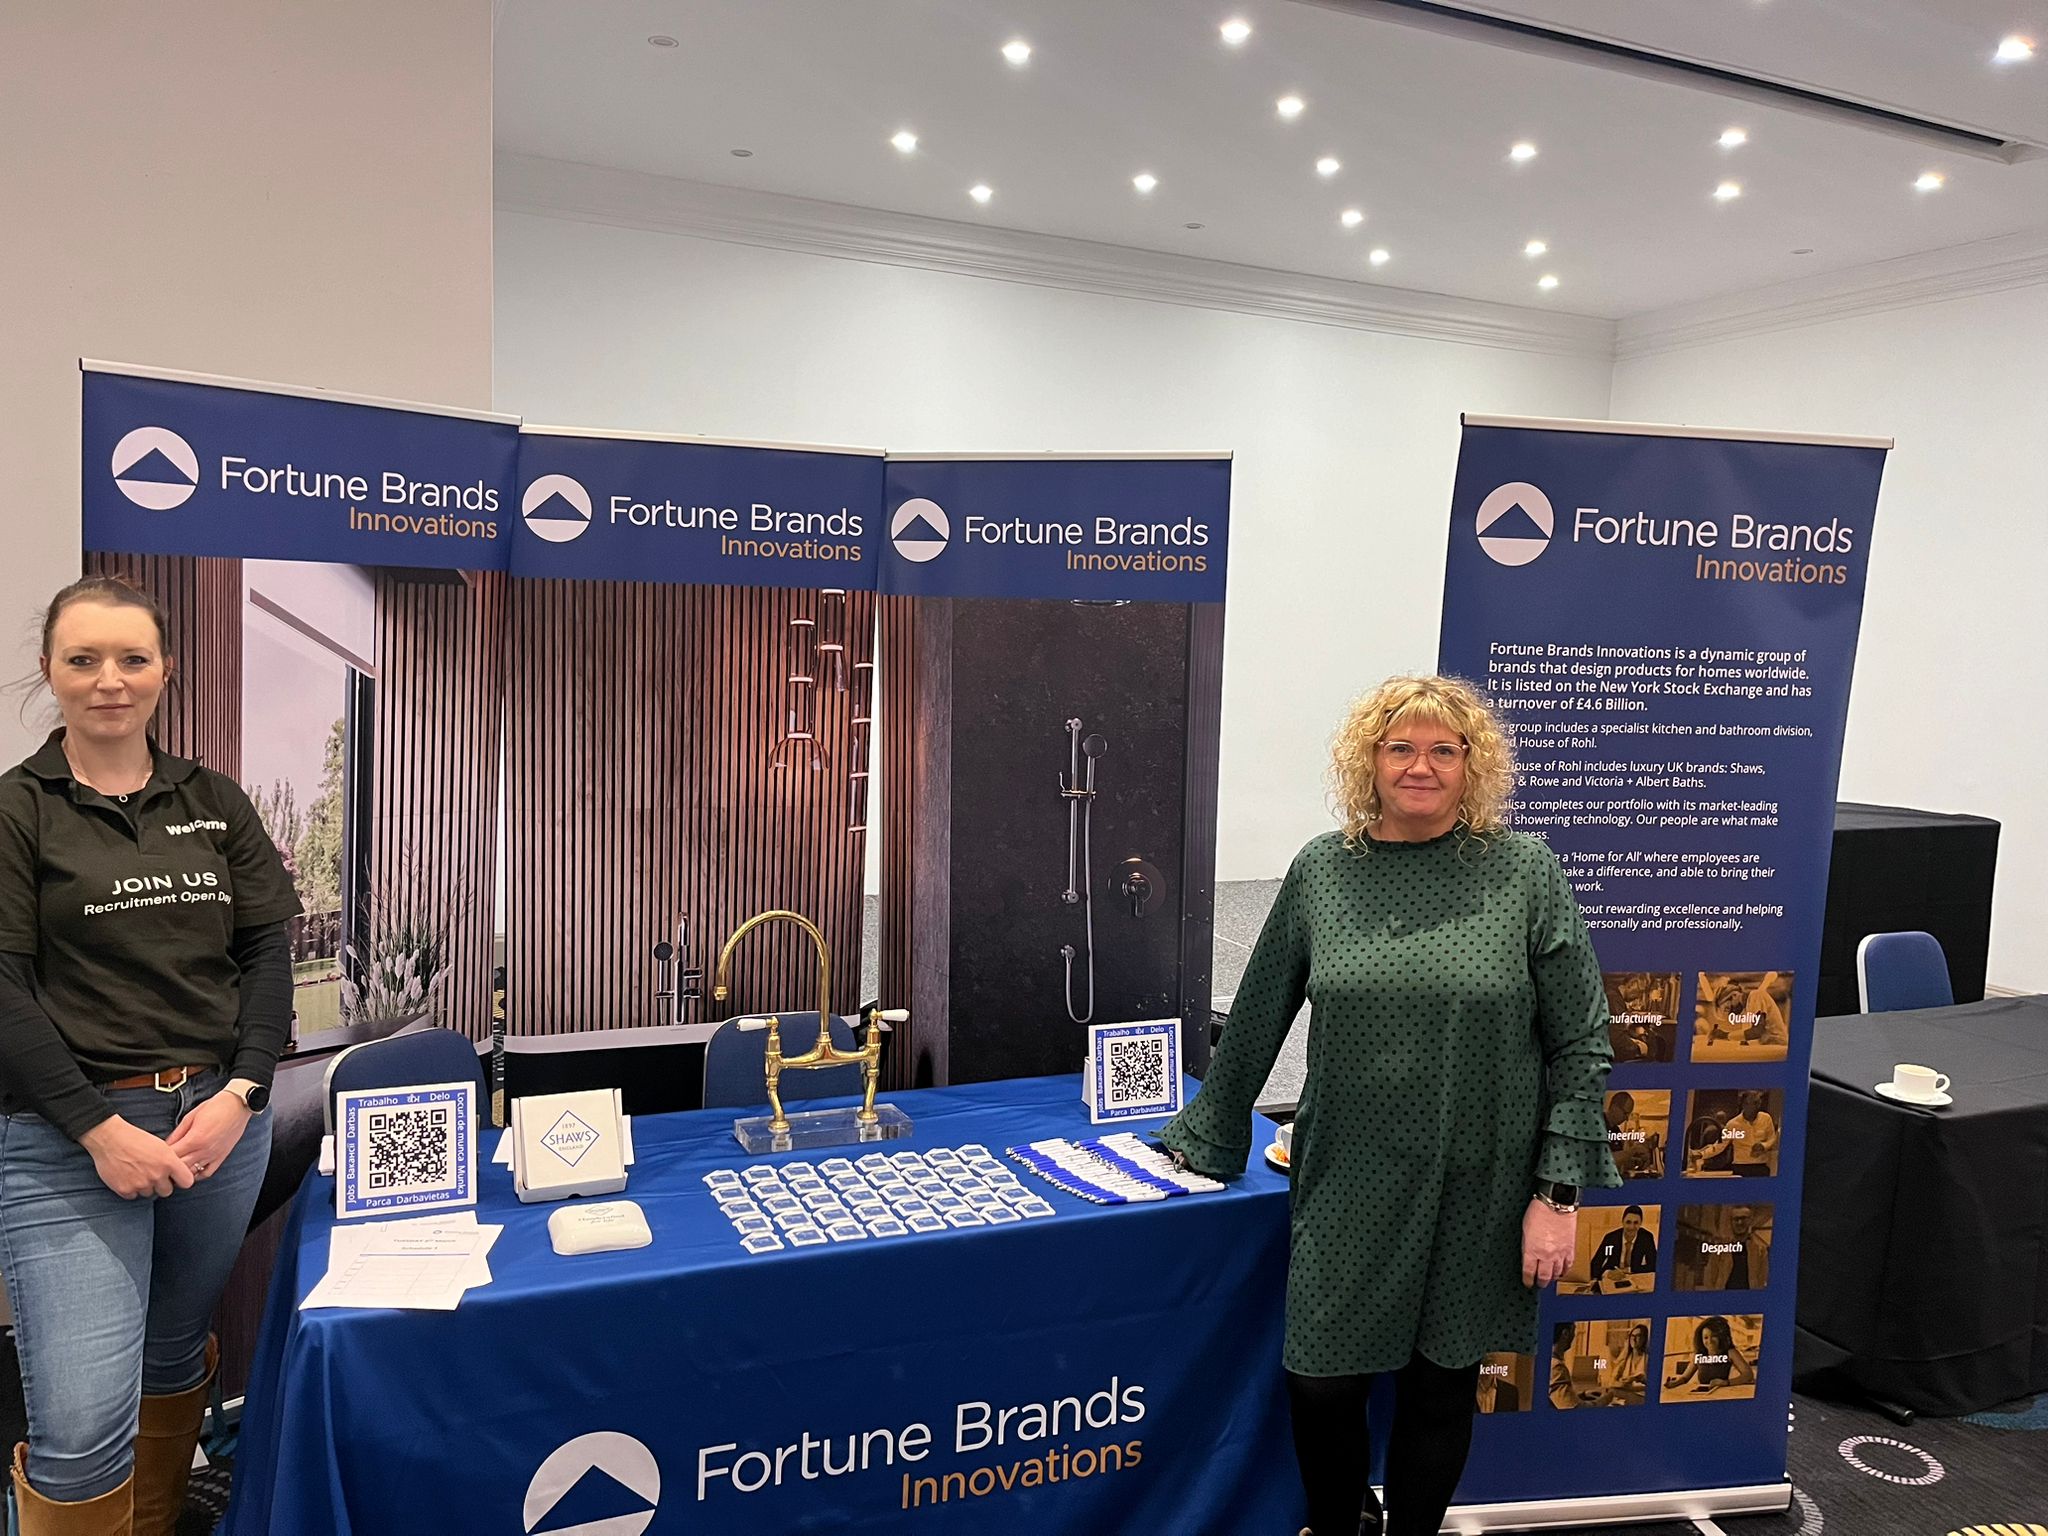 Fortune Brands at our event in Telford & Shrewsbury